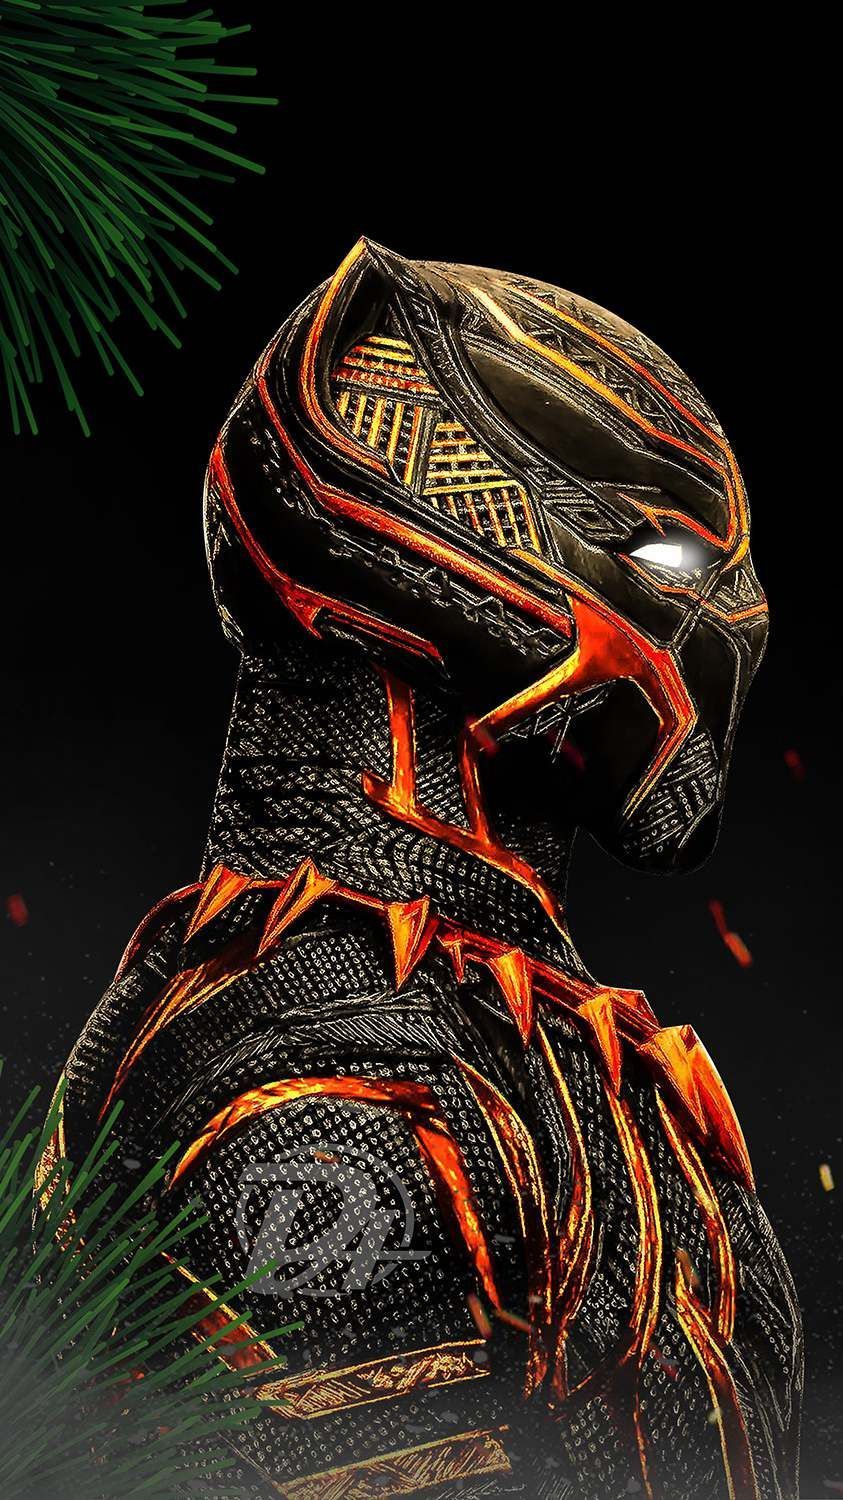 Black Panther Red Suit iPhone Wallpaper. Black panther HD wallpaper, Marvel wallpaper, Black panther